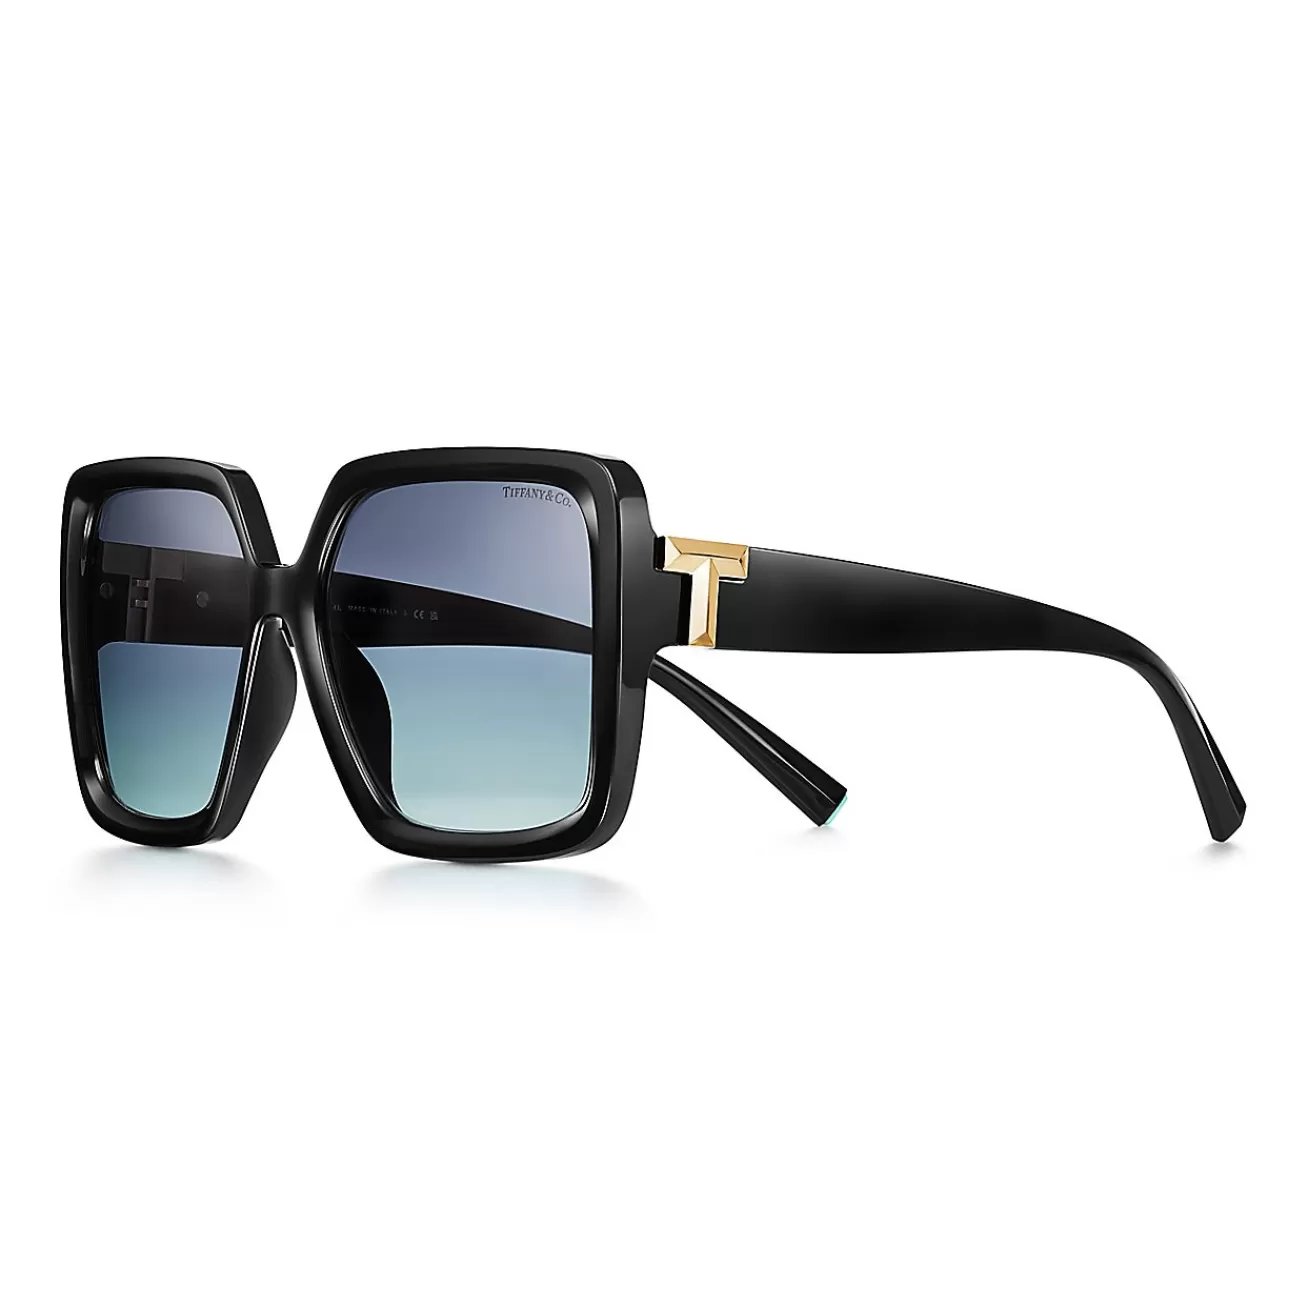 Tiffany & Co. Tiffany T Sunglasses in Black Acetate with Tiffany Blue® Lenses | ^Women Tiffany T | Gifts $1,500 & Under